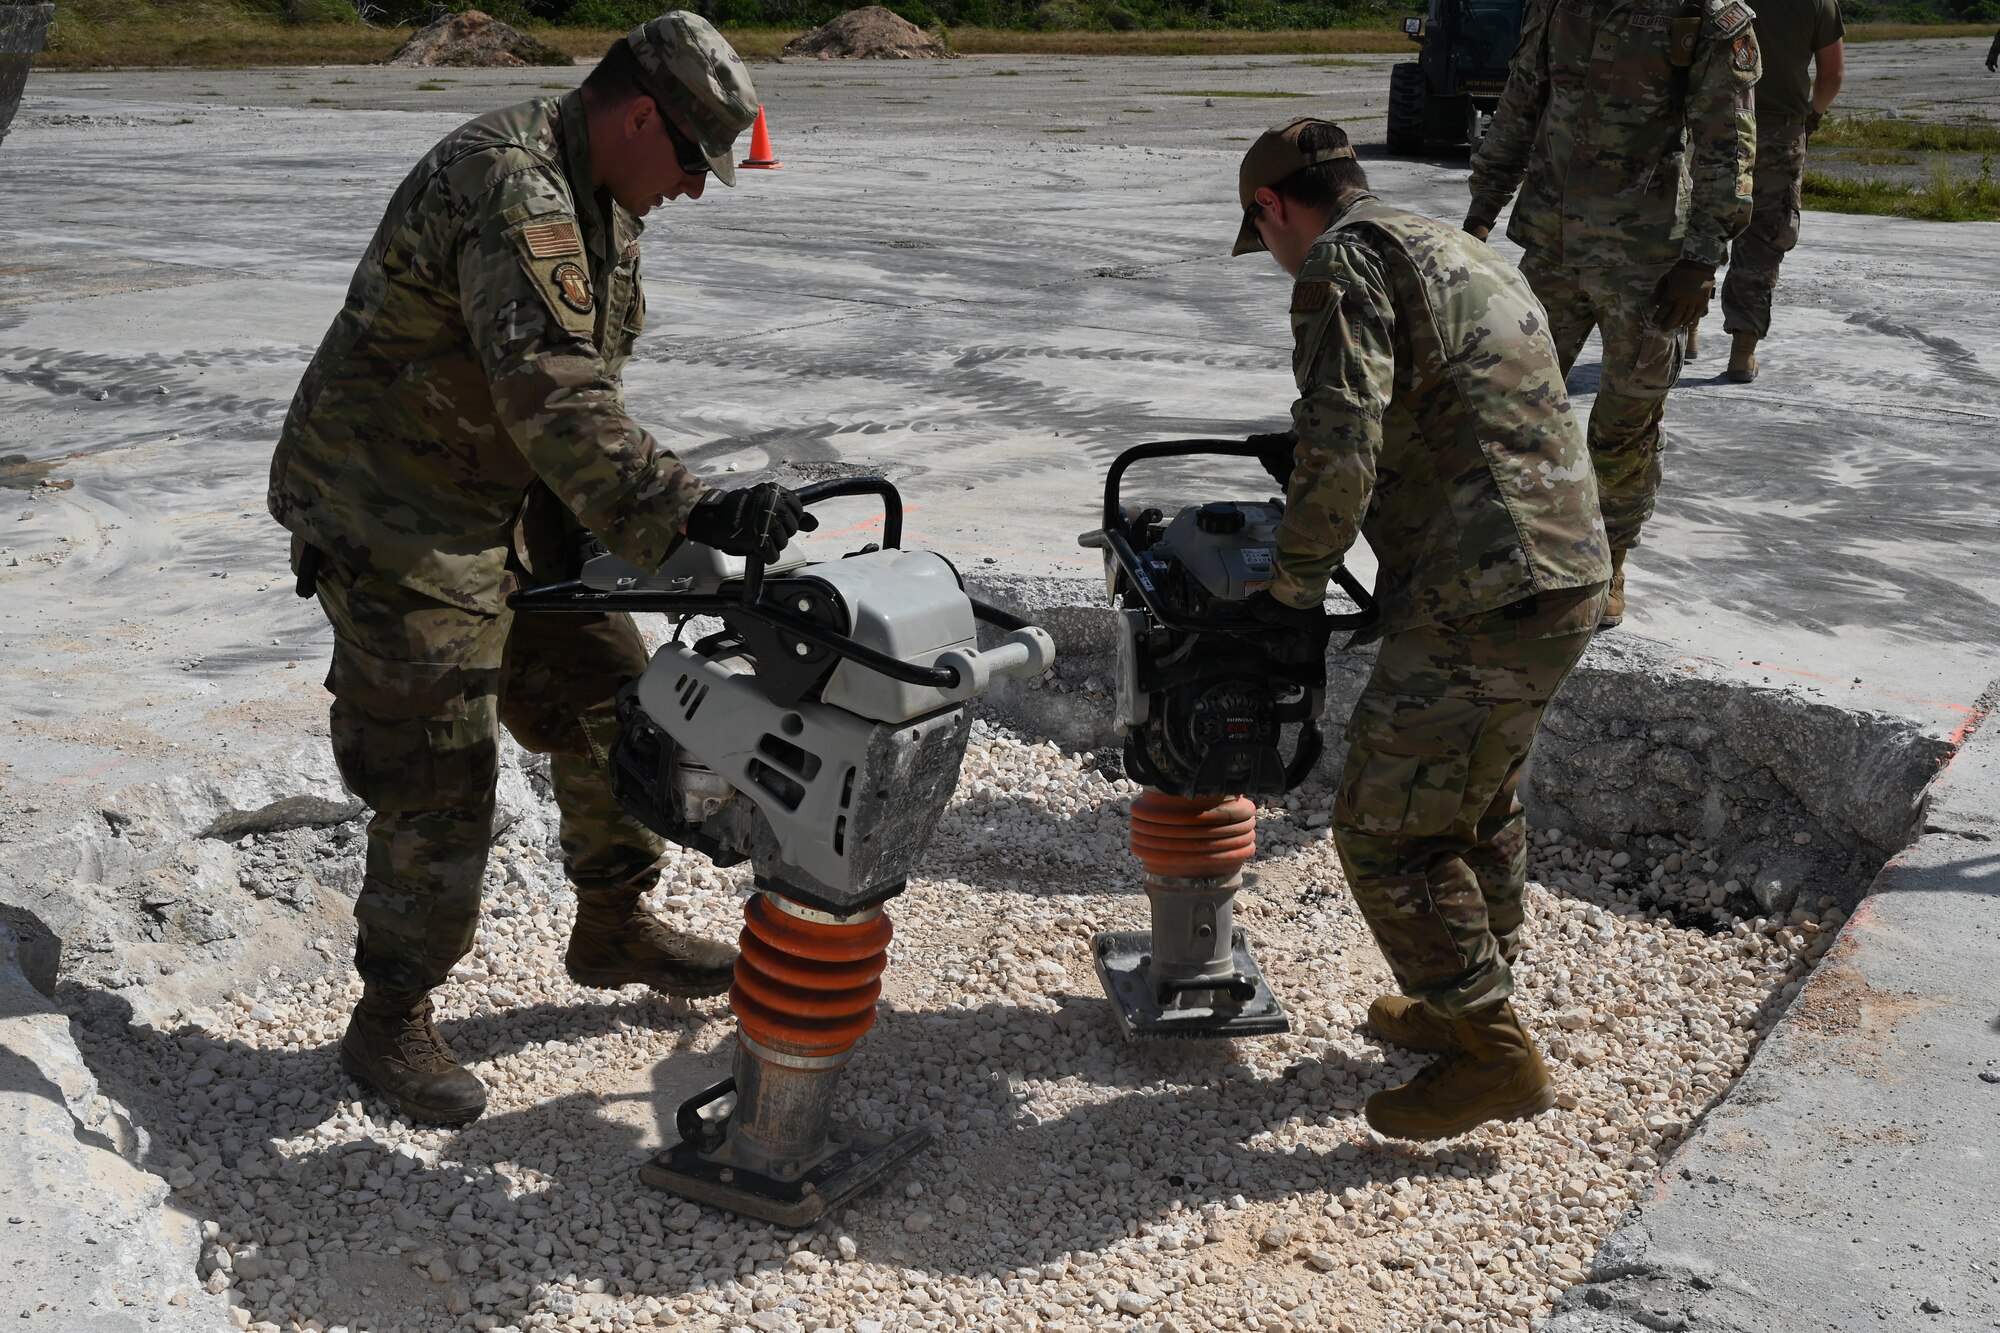 Two Airmen use jumping jack compactors to compress the new material in the crater.